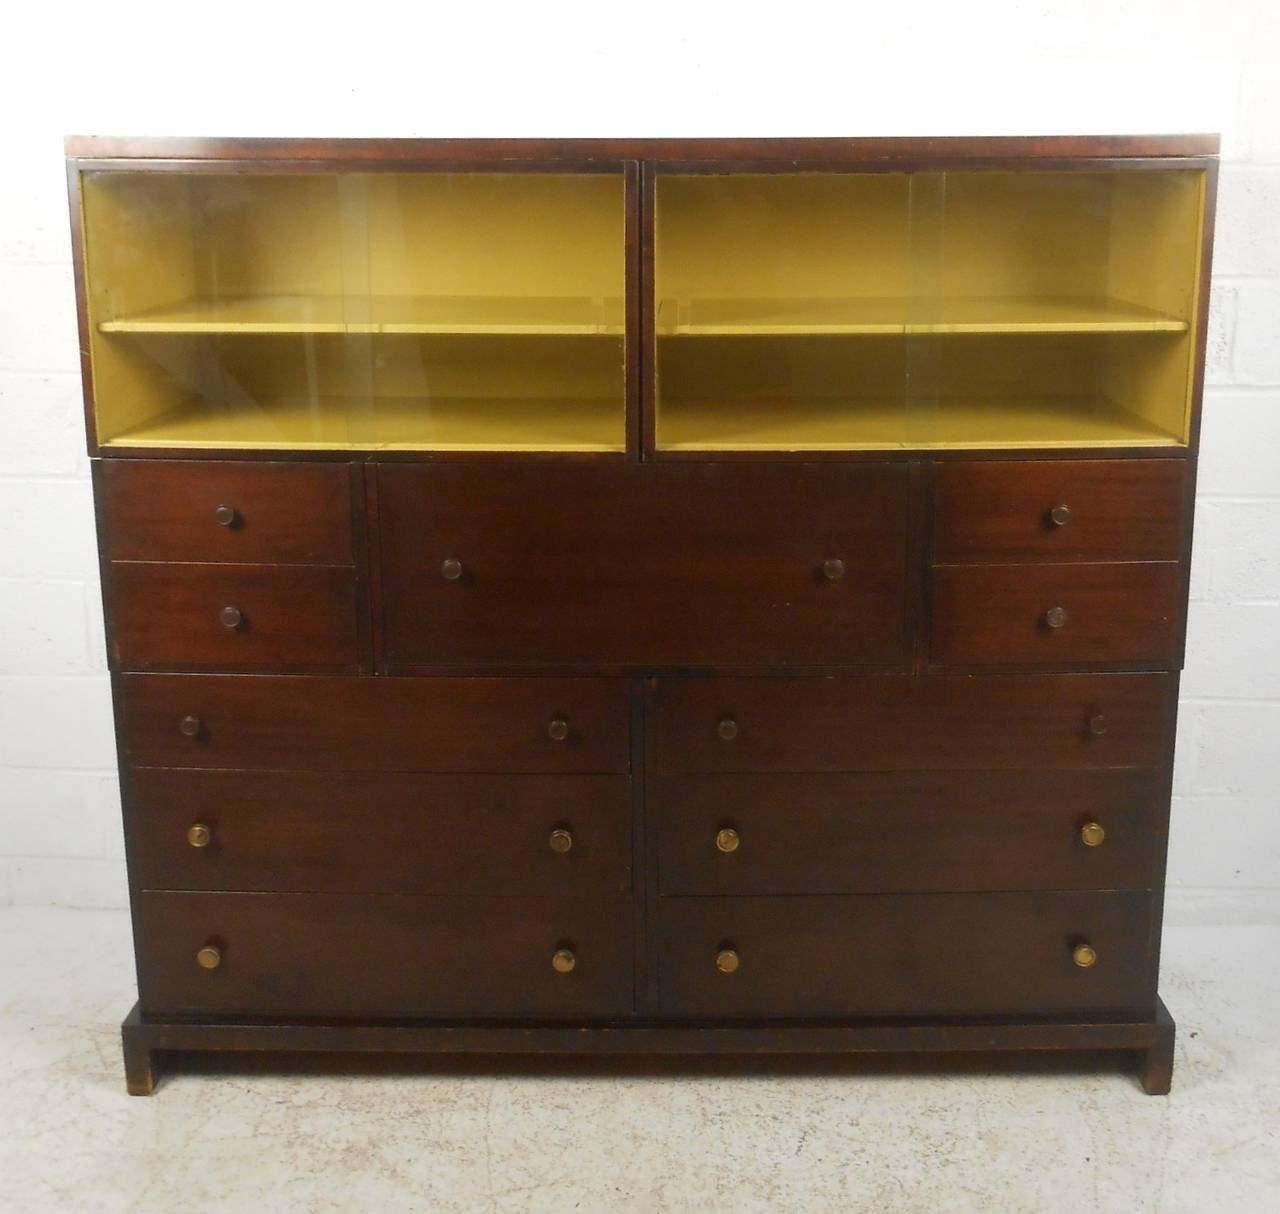 American Mid-Century Modern Style Drop Front Dresser with Desk by Widdcomb